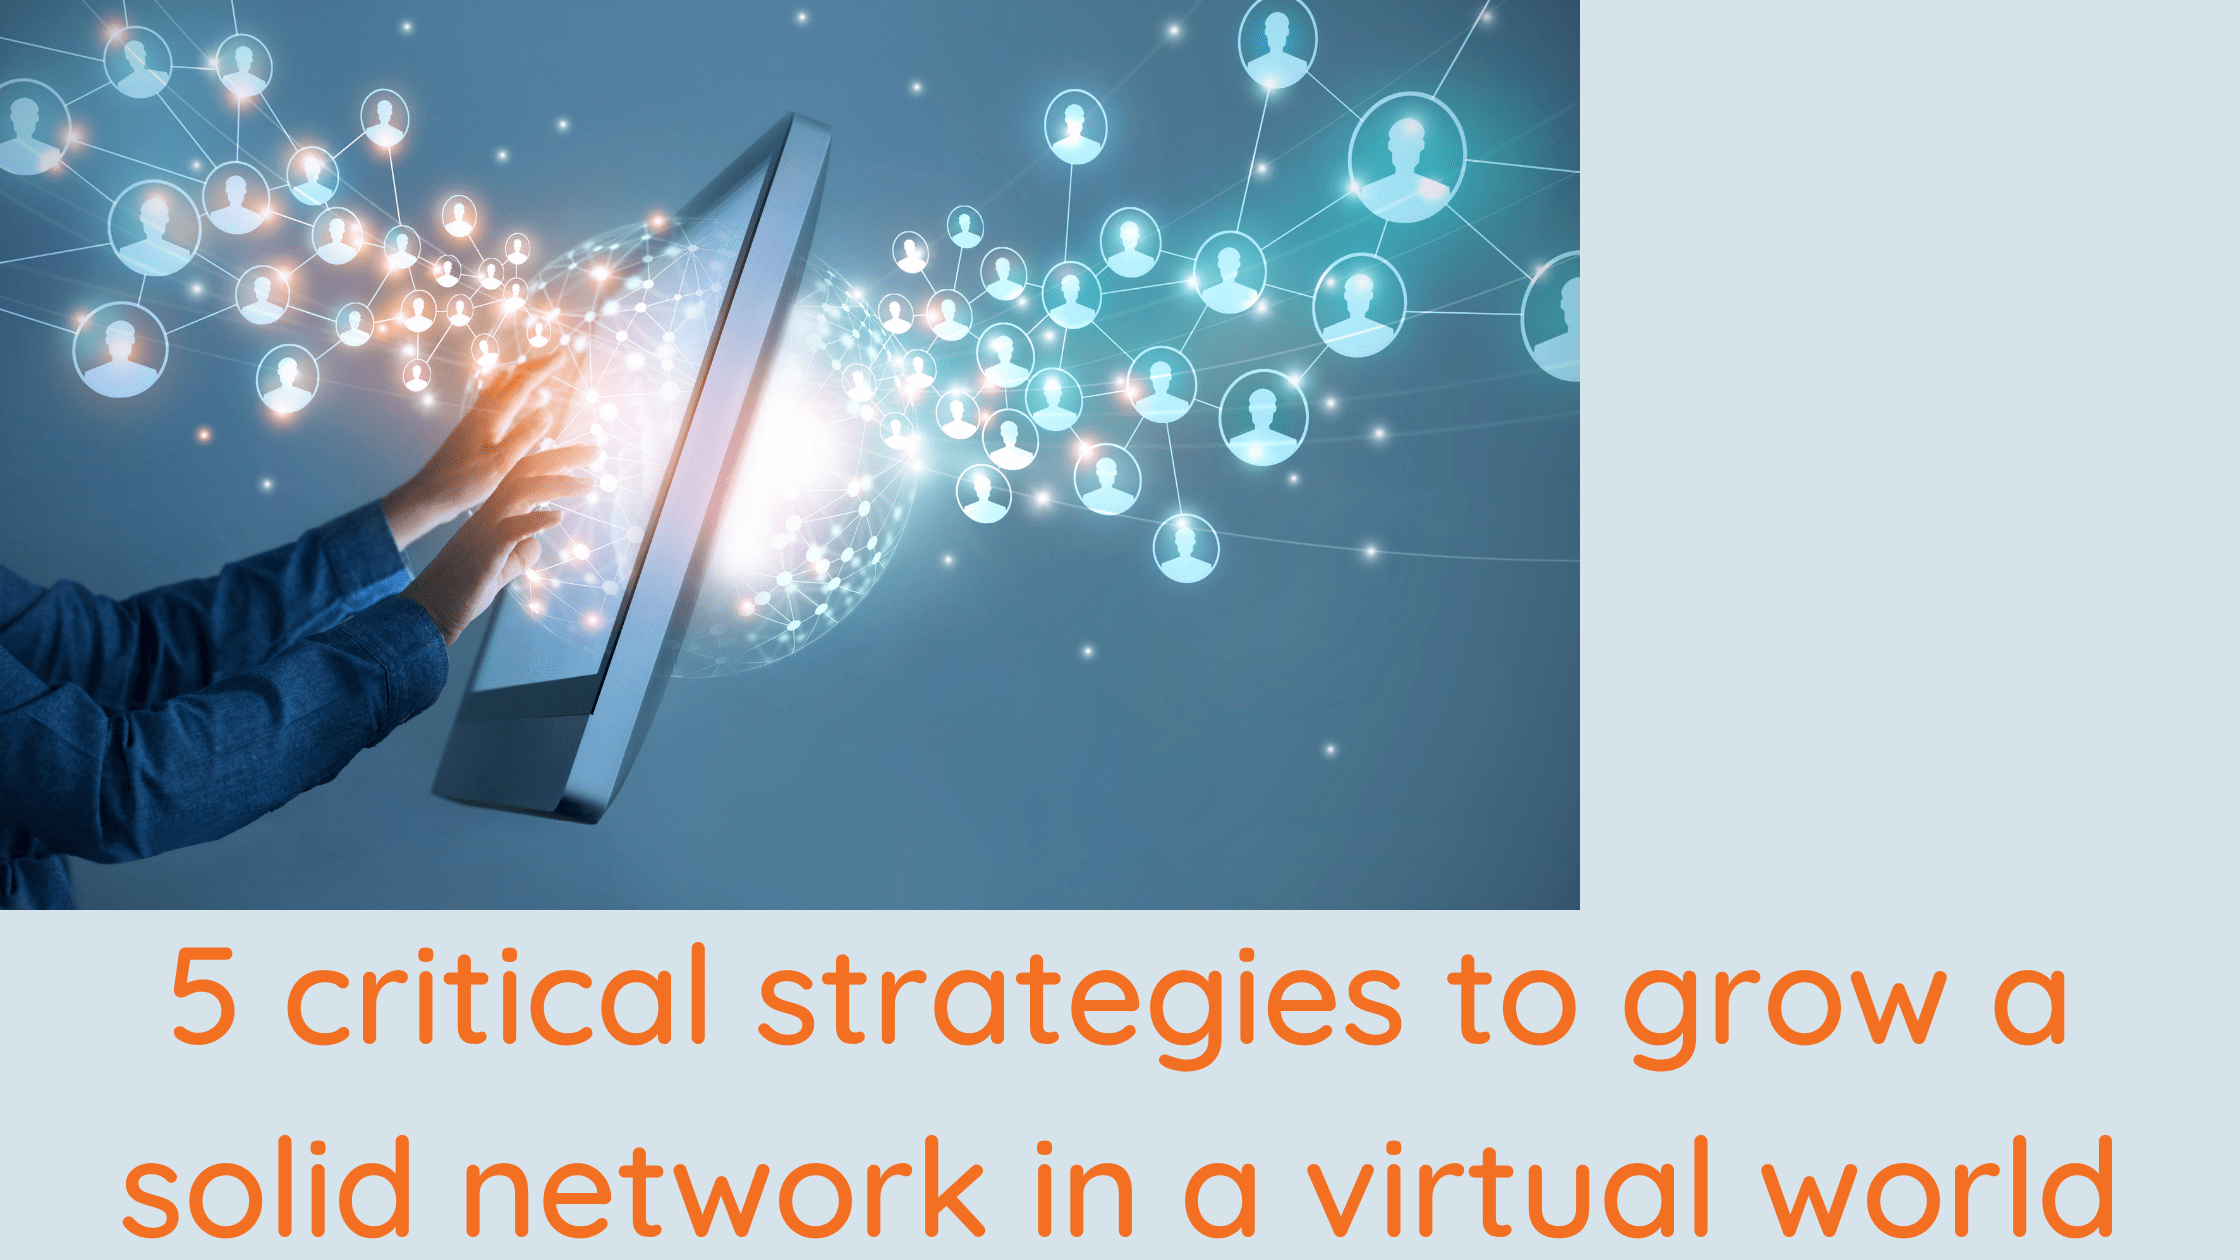 5 critical strategies to grow a solid network in a virtual world